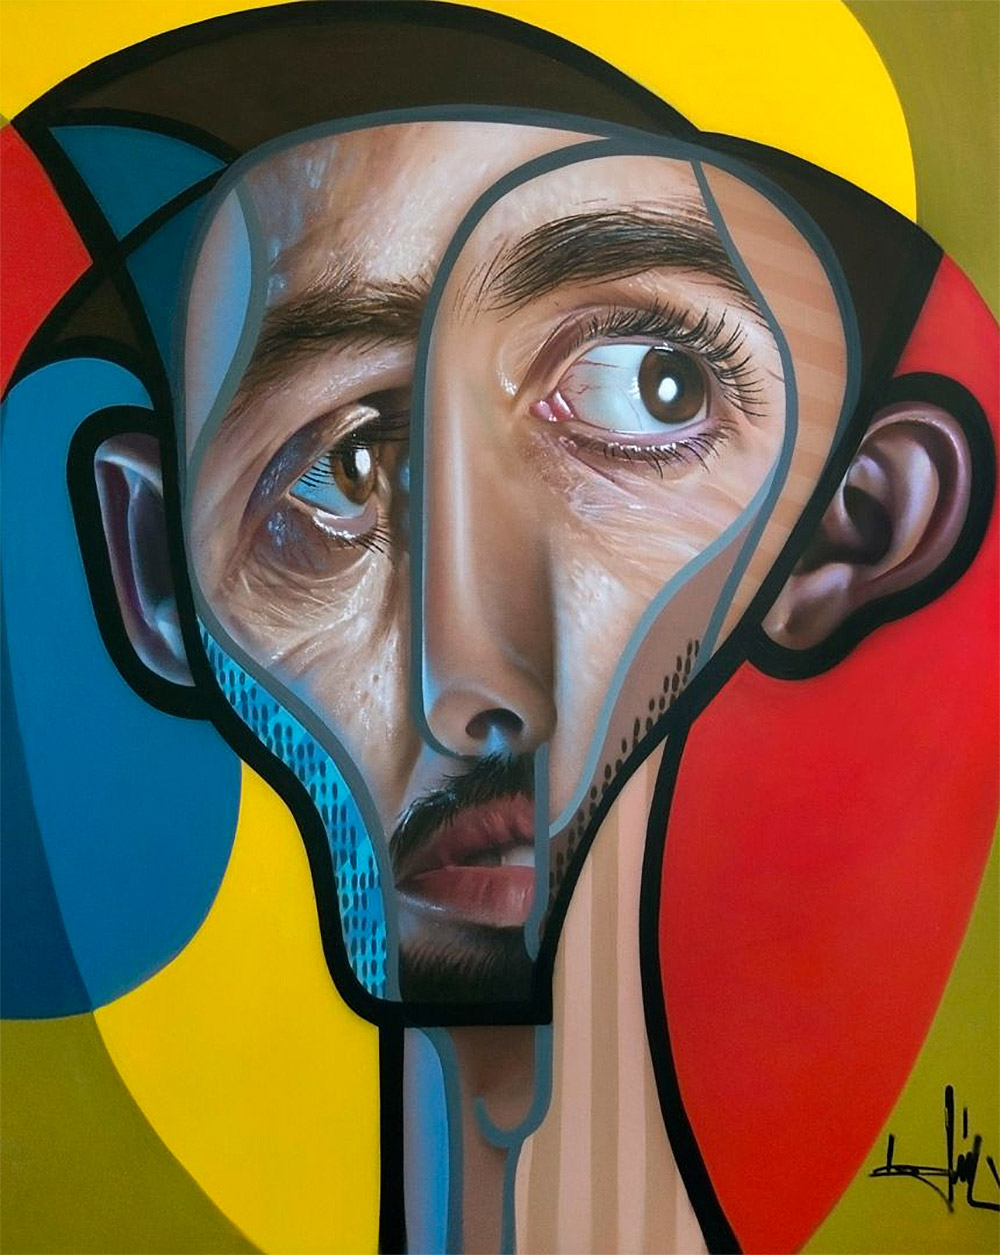 Post Neo Cubism: Paintings & Murals by Belin | Daily design inspiration